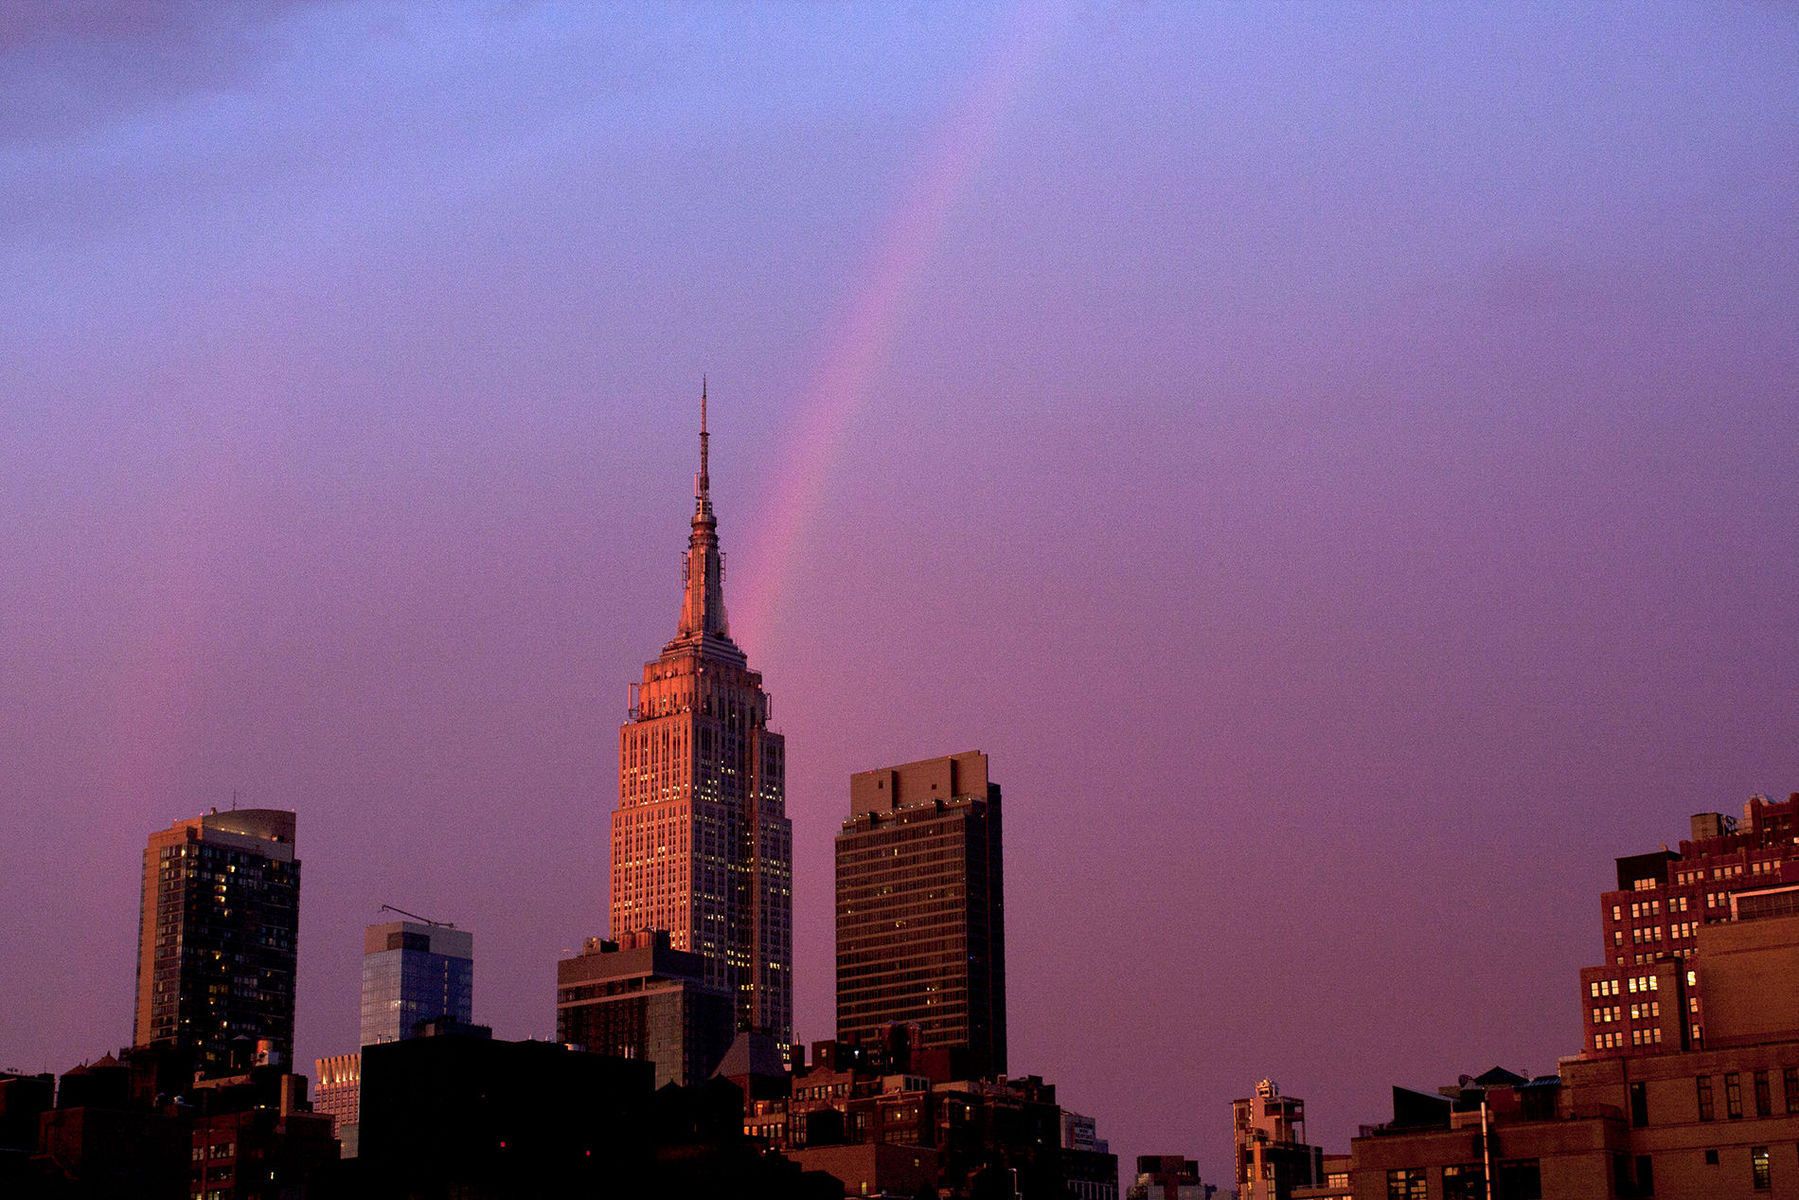 <h4 style="text-transform:uppercase">Empire State and Rainbow</h4>
<div class="captiontext">

</div>



Empire State Building Series : Limited Editions : Photography by Adam Stoltman: Sports Photography, The Arts, Portraiture, Travel, Photojournalism and Fine Art in New York